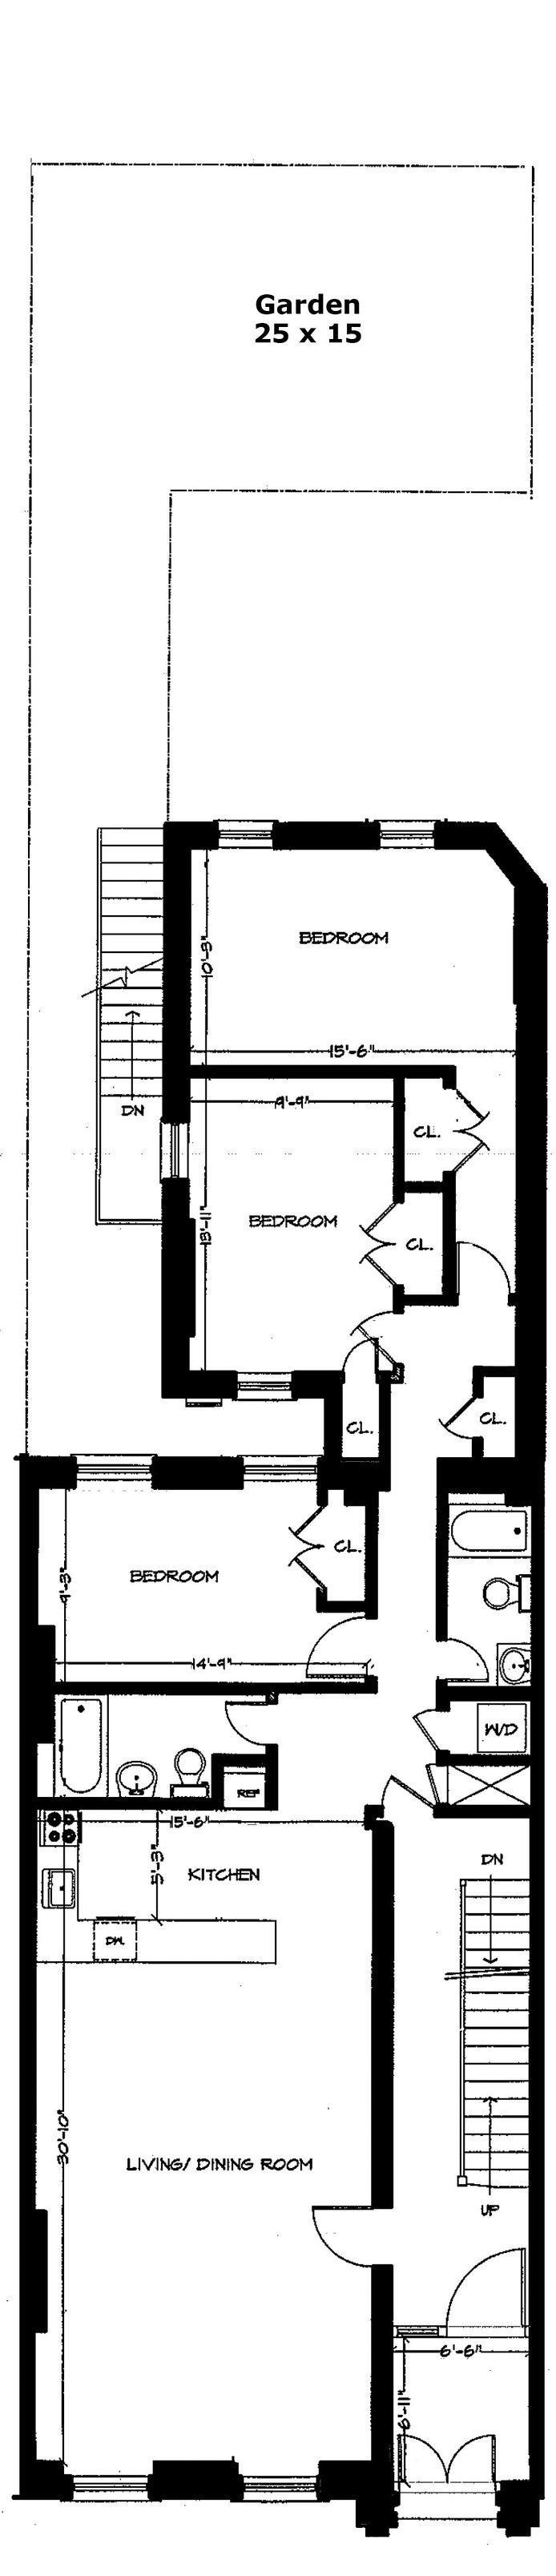 Floorplan for 87 First Place, 2